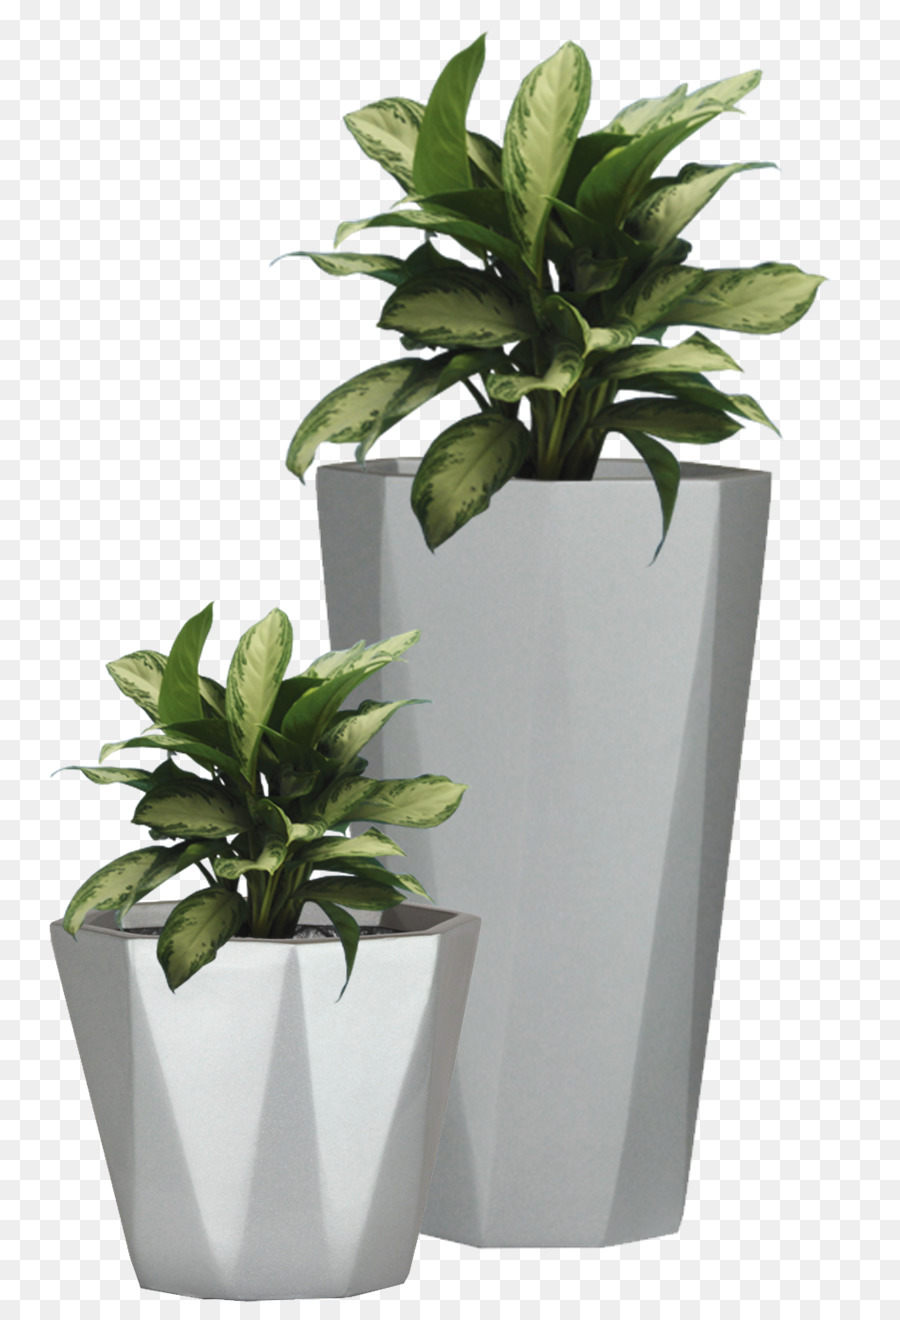 Flowerpot Etsy Wall decal Succulent plant - Potted Plant Png Pictures png download - 813*1307 - Free Transparent Flowerpot png Download.